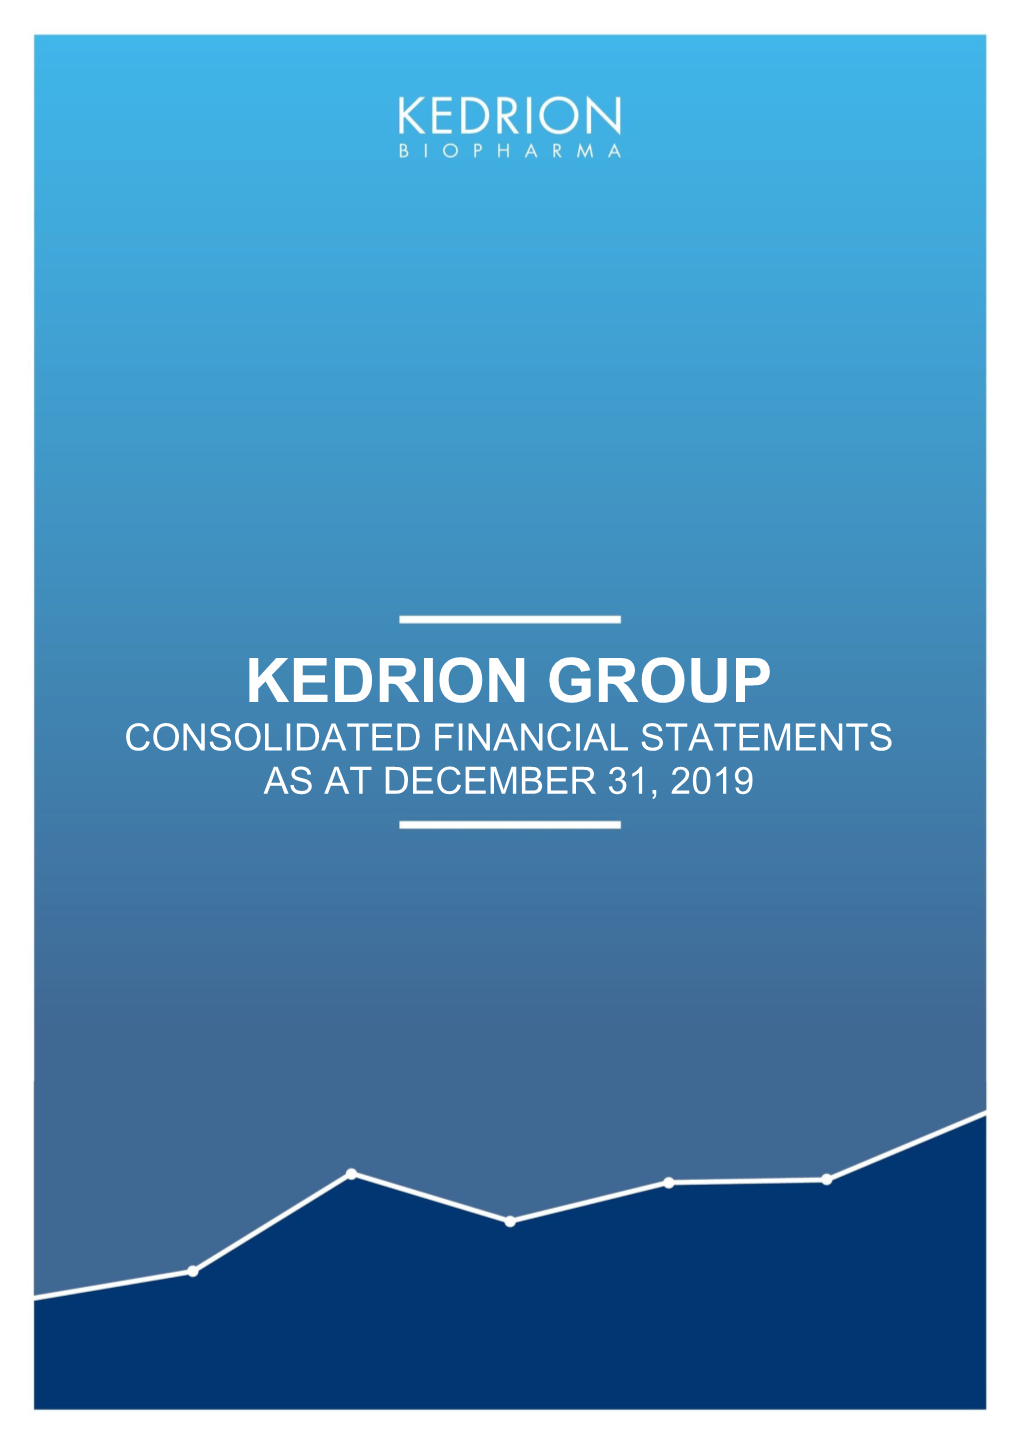 Kedrion Group Consolidated Financial Statements As at December 31, 2019